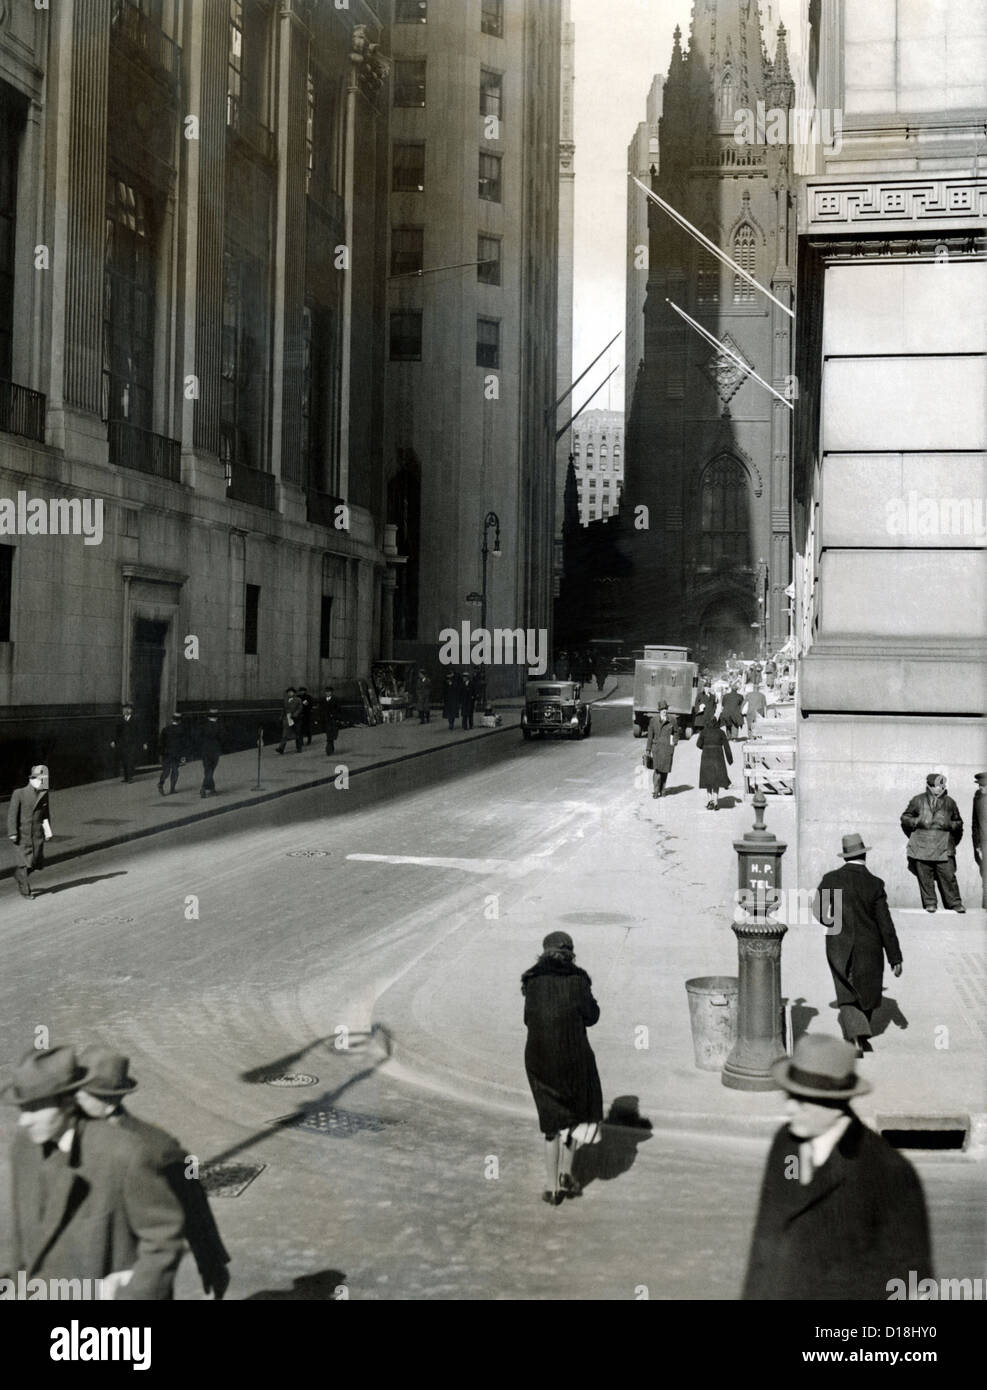 Wall Street on March 10, 1933 during the New Deal 'Bank Holiday'. Usually crowded, the streets are relatively empty, following Stock Photo